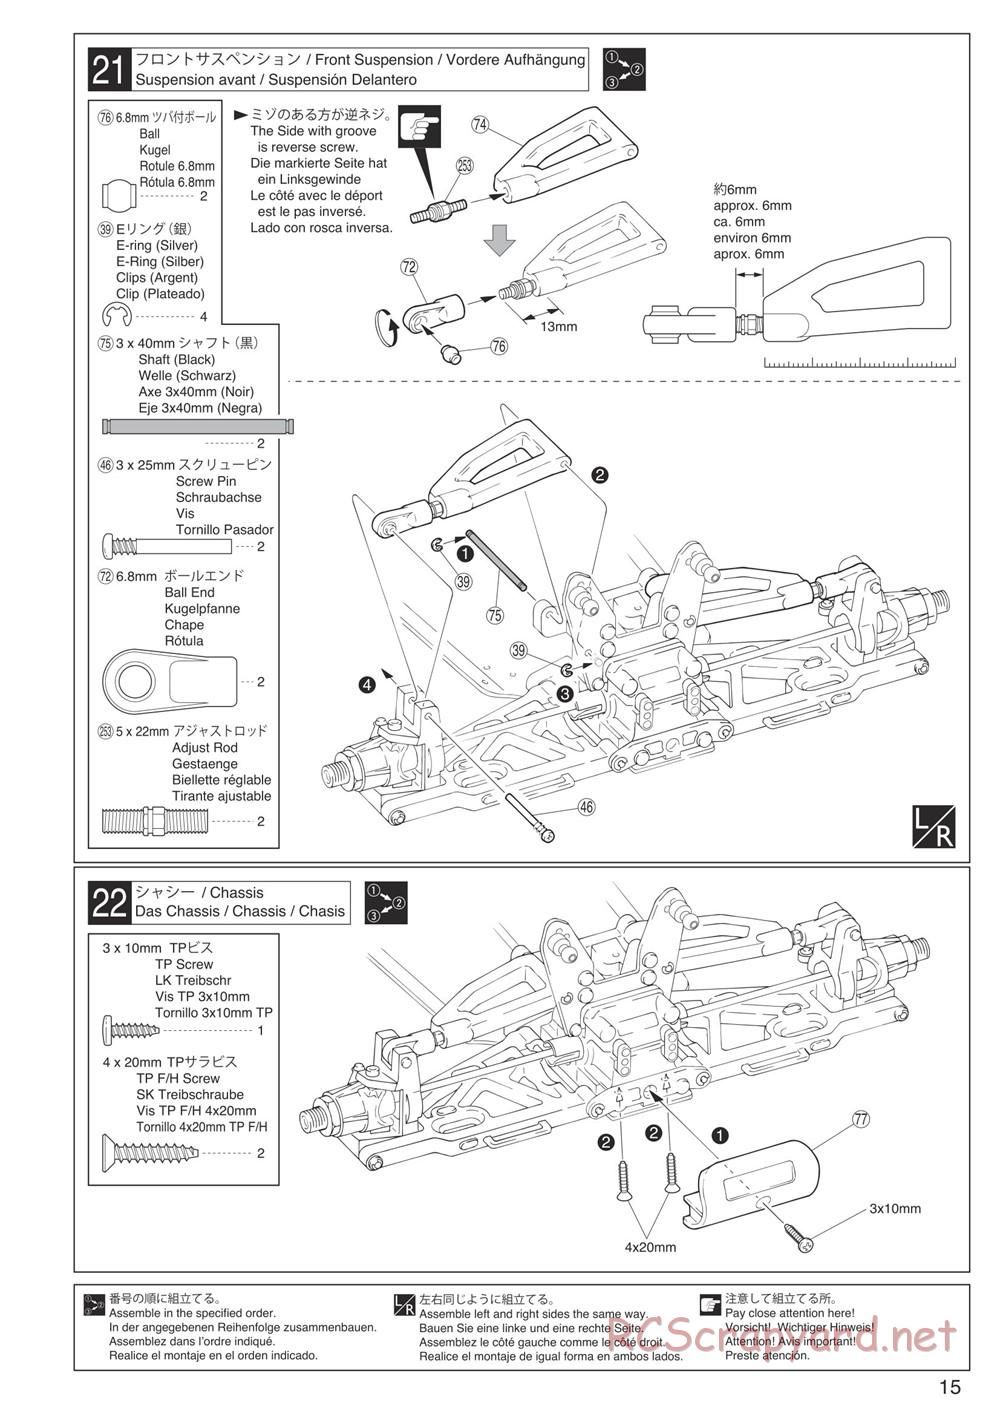 Kyosho - Inferno Neo - Manual - Page 15